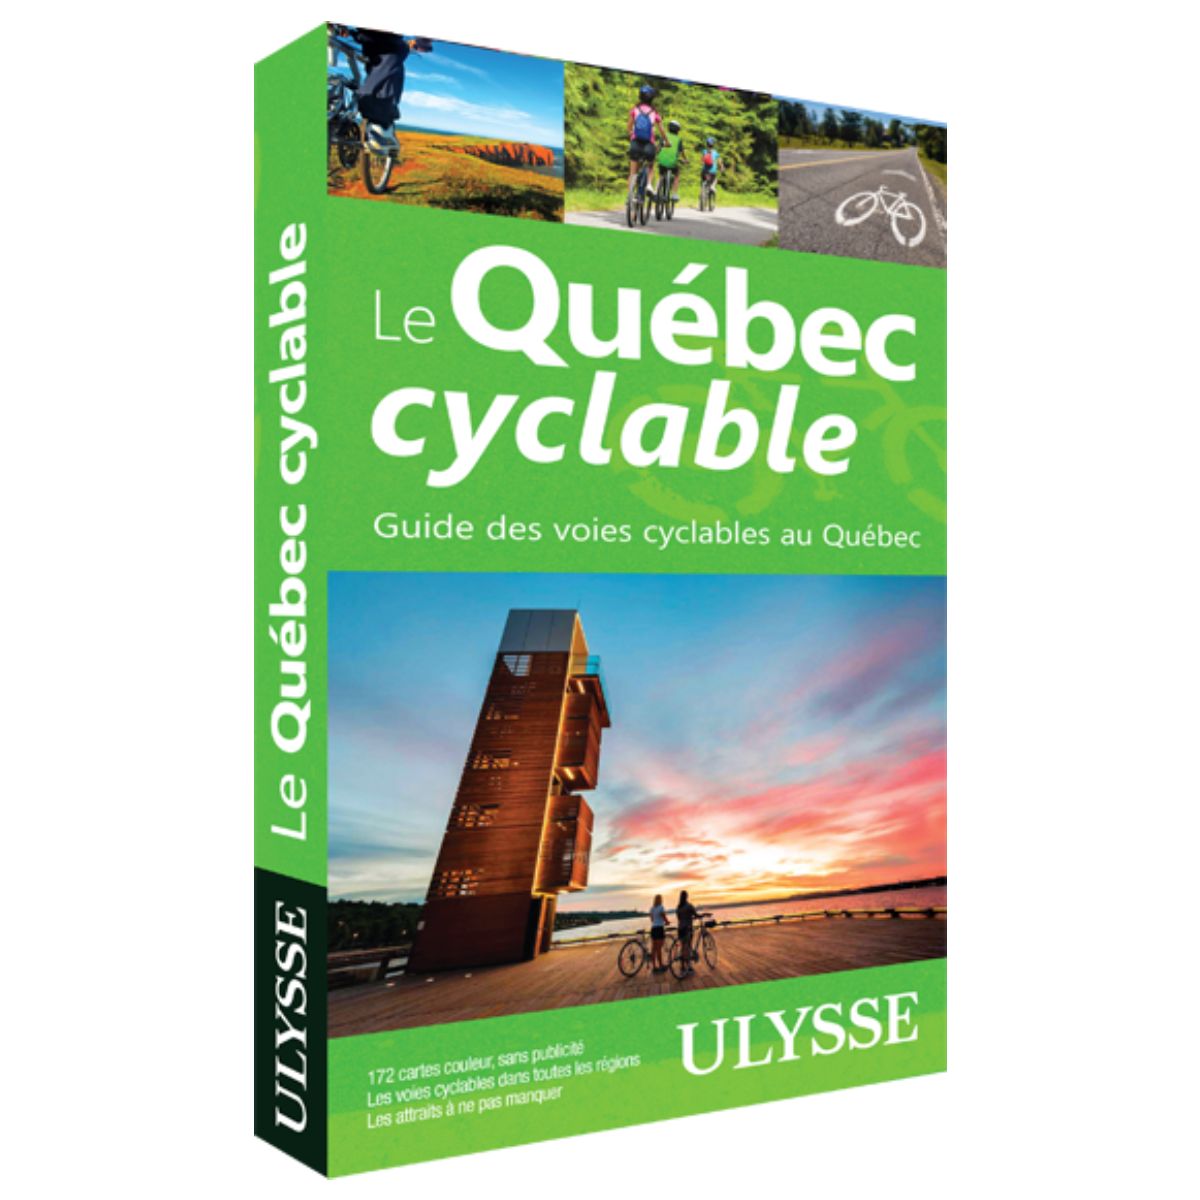 The Québec Cyclable - Guide to Cycling Routes in Québec